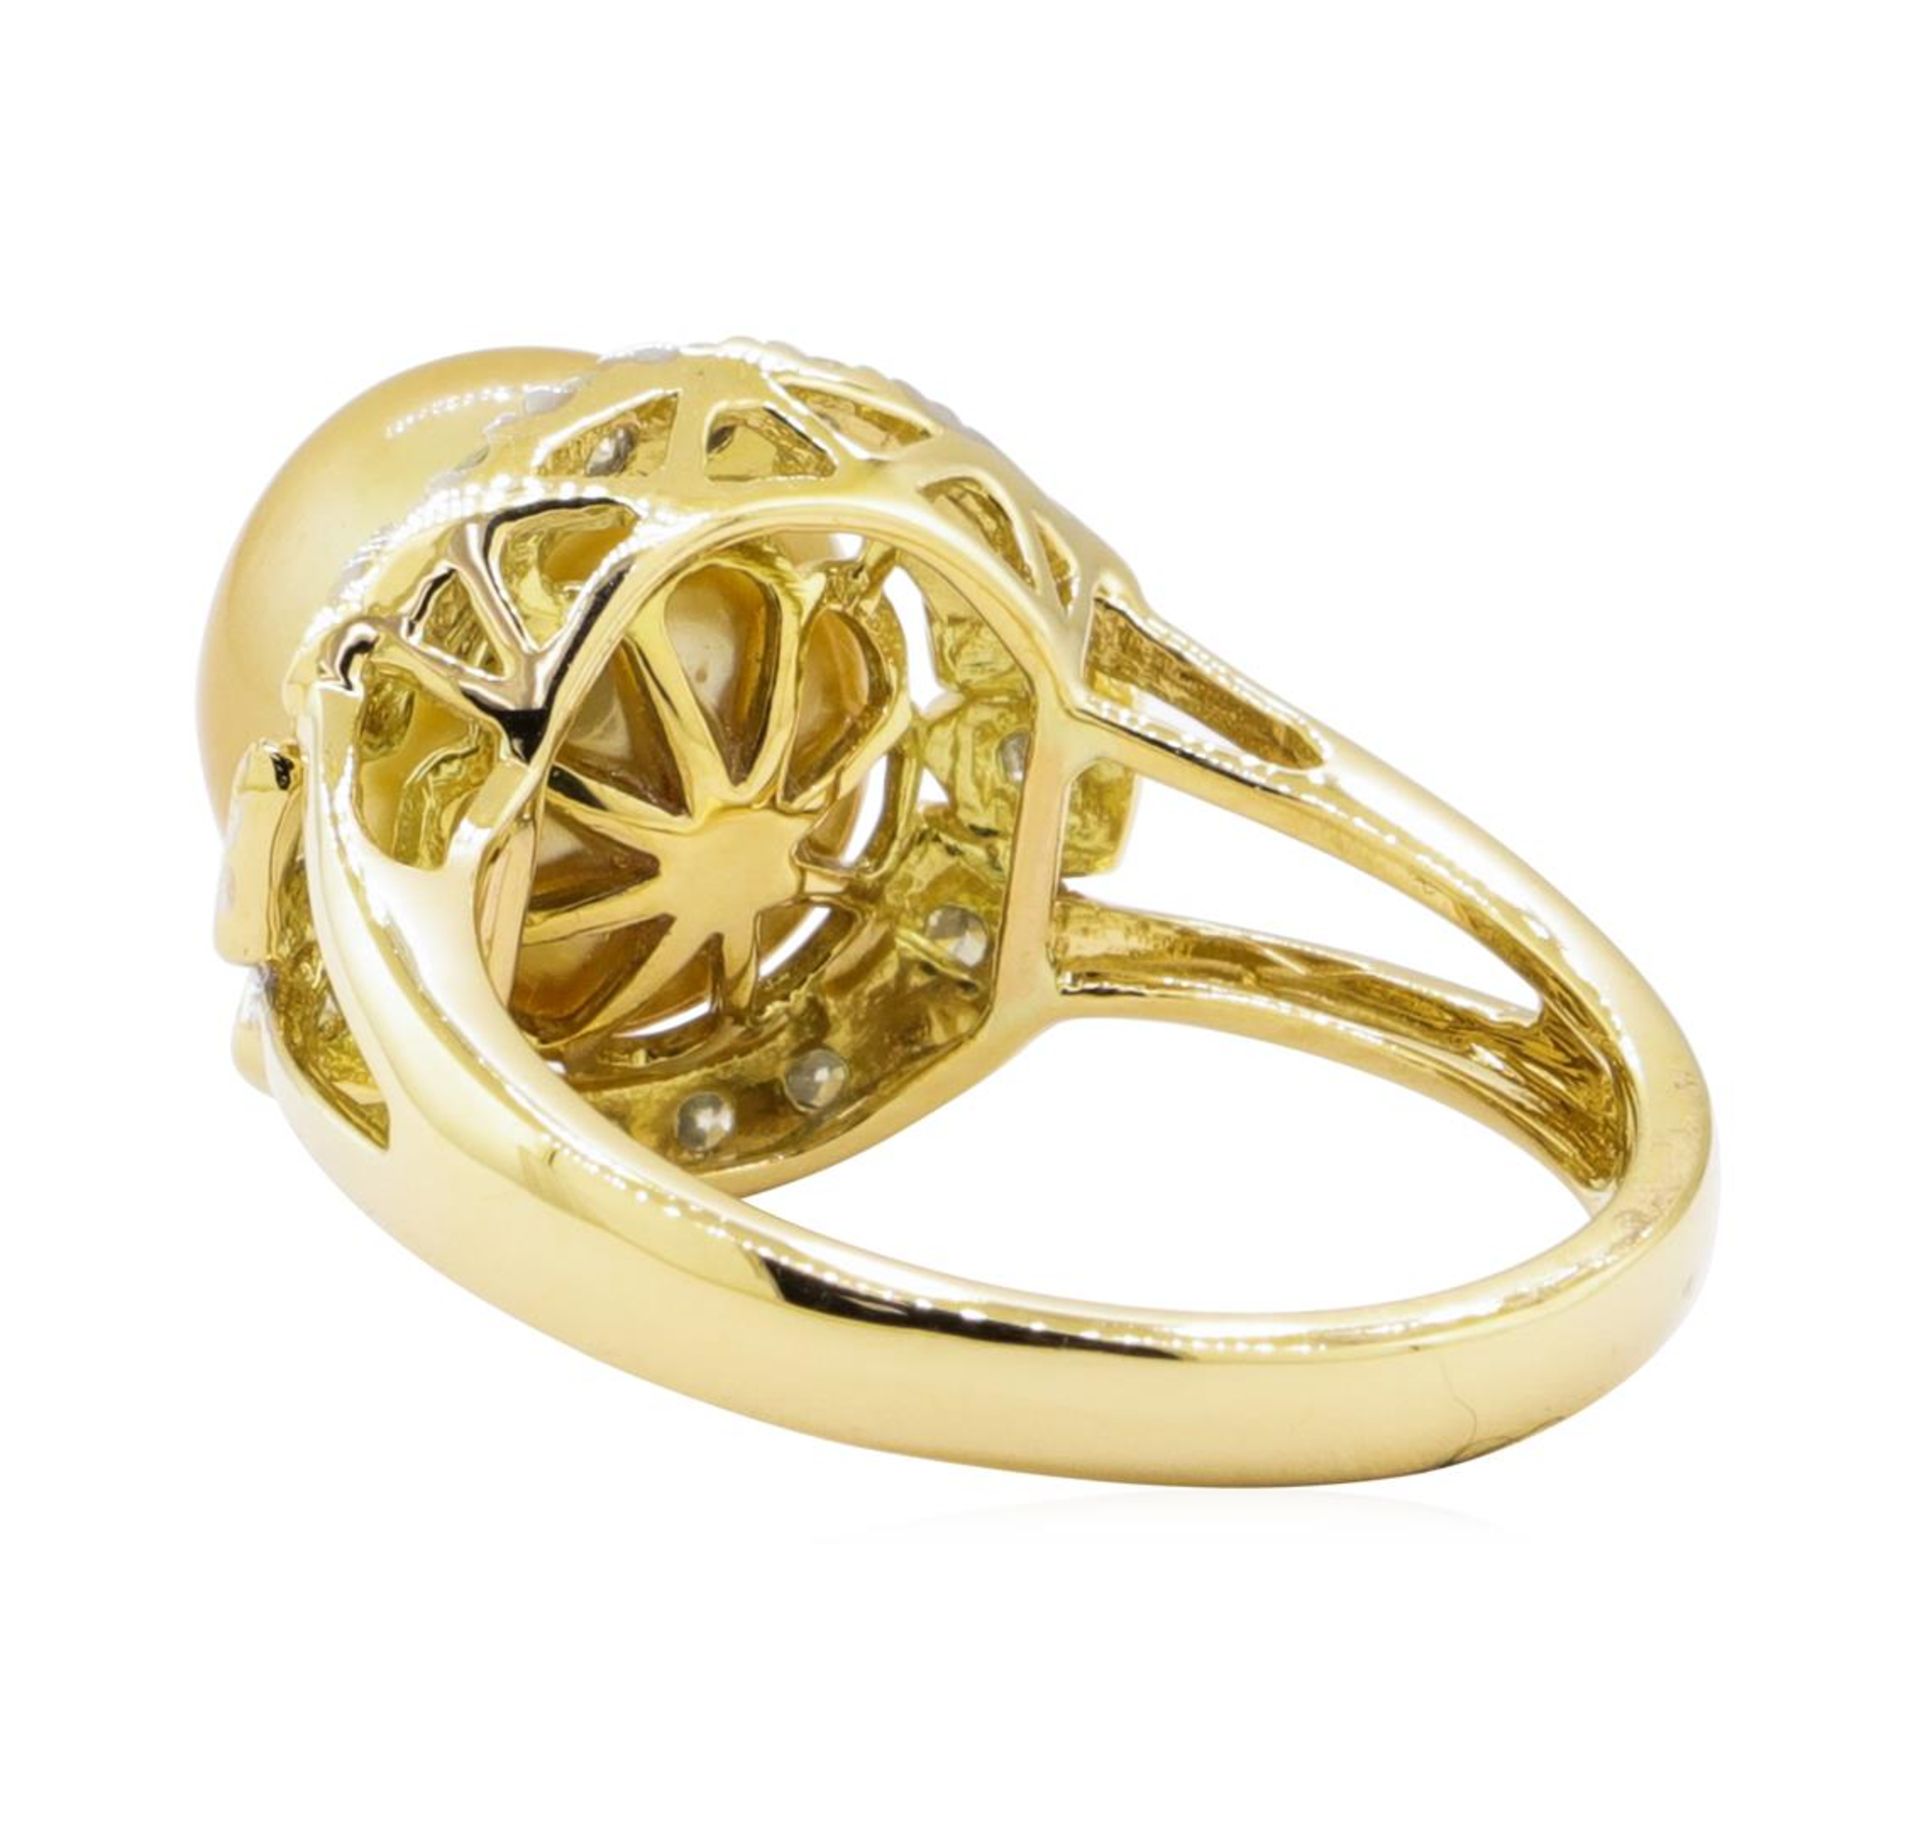 Pearl and Diamond Ring - 18KT Yellow Gold - Image 3 of 5